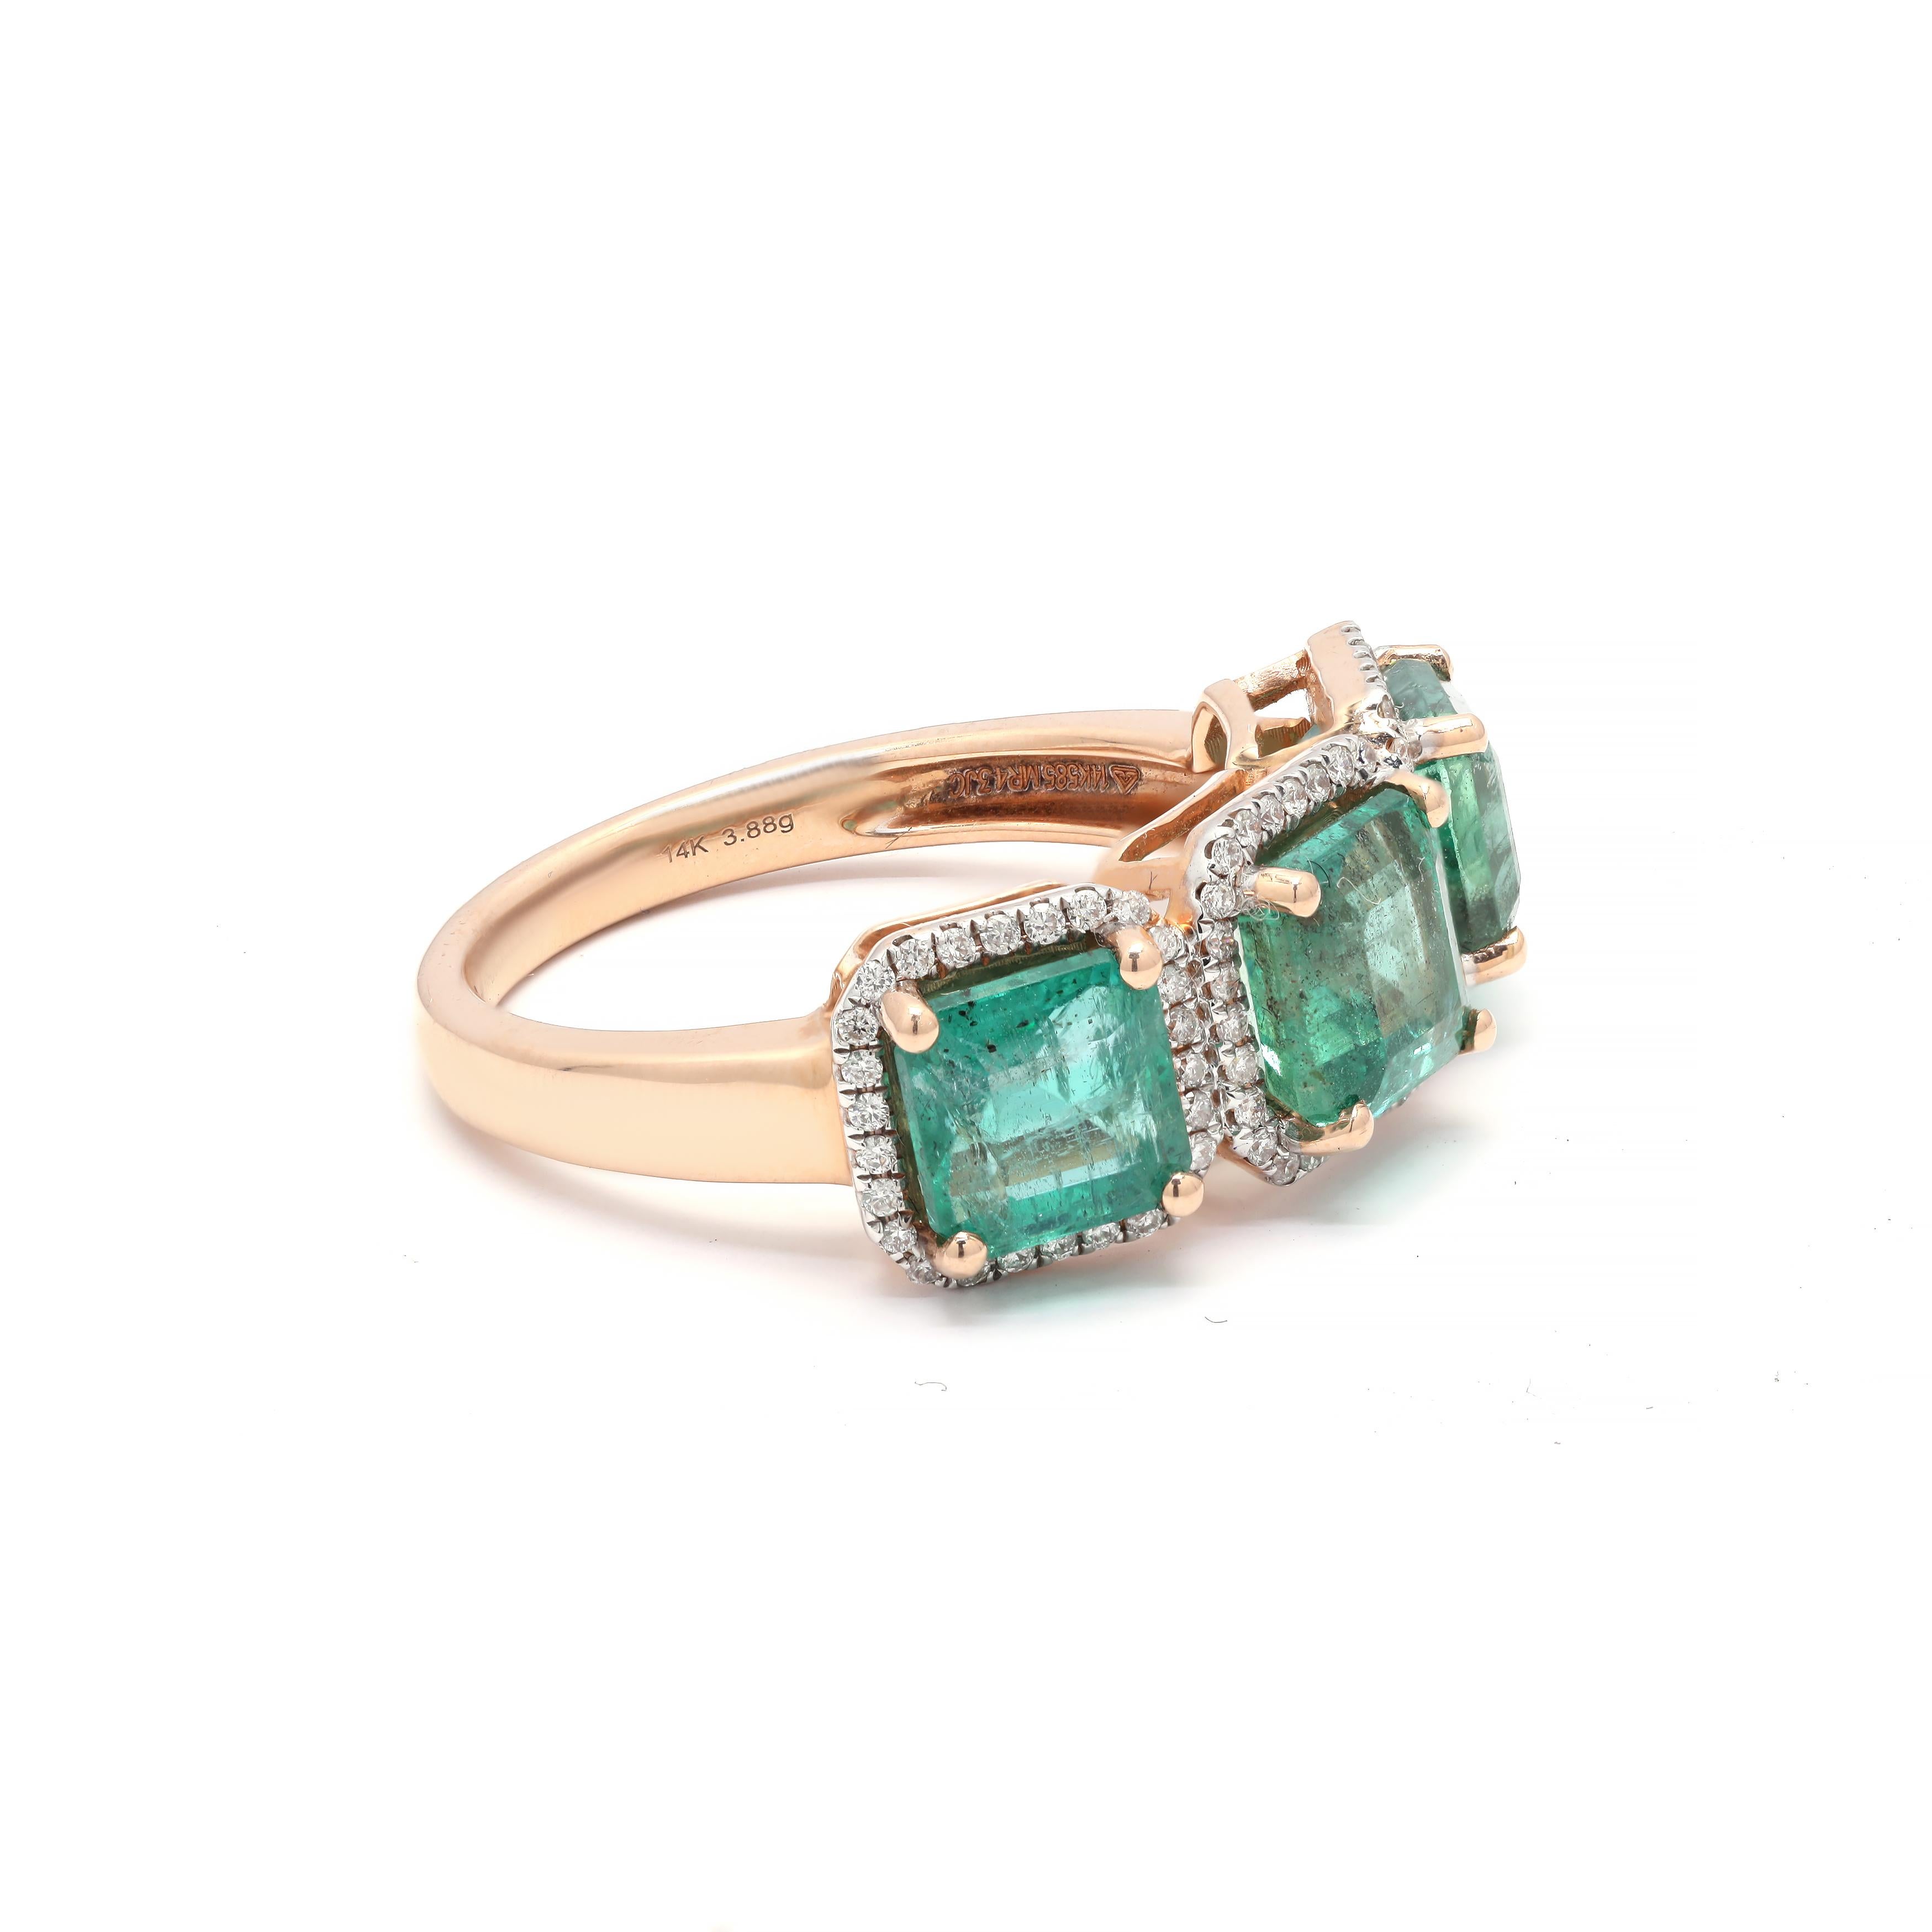 For Sale:  Three Stone Emerald and Diamond Ring in 14k Rose Gold 2